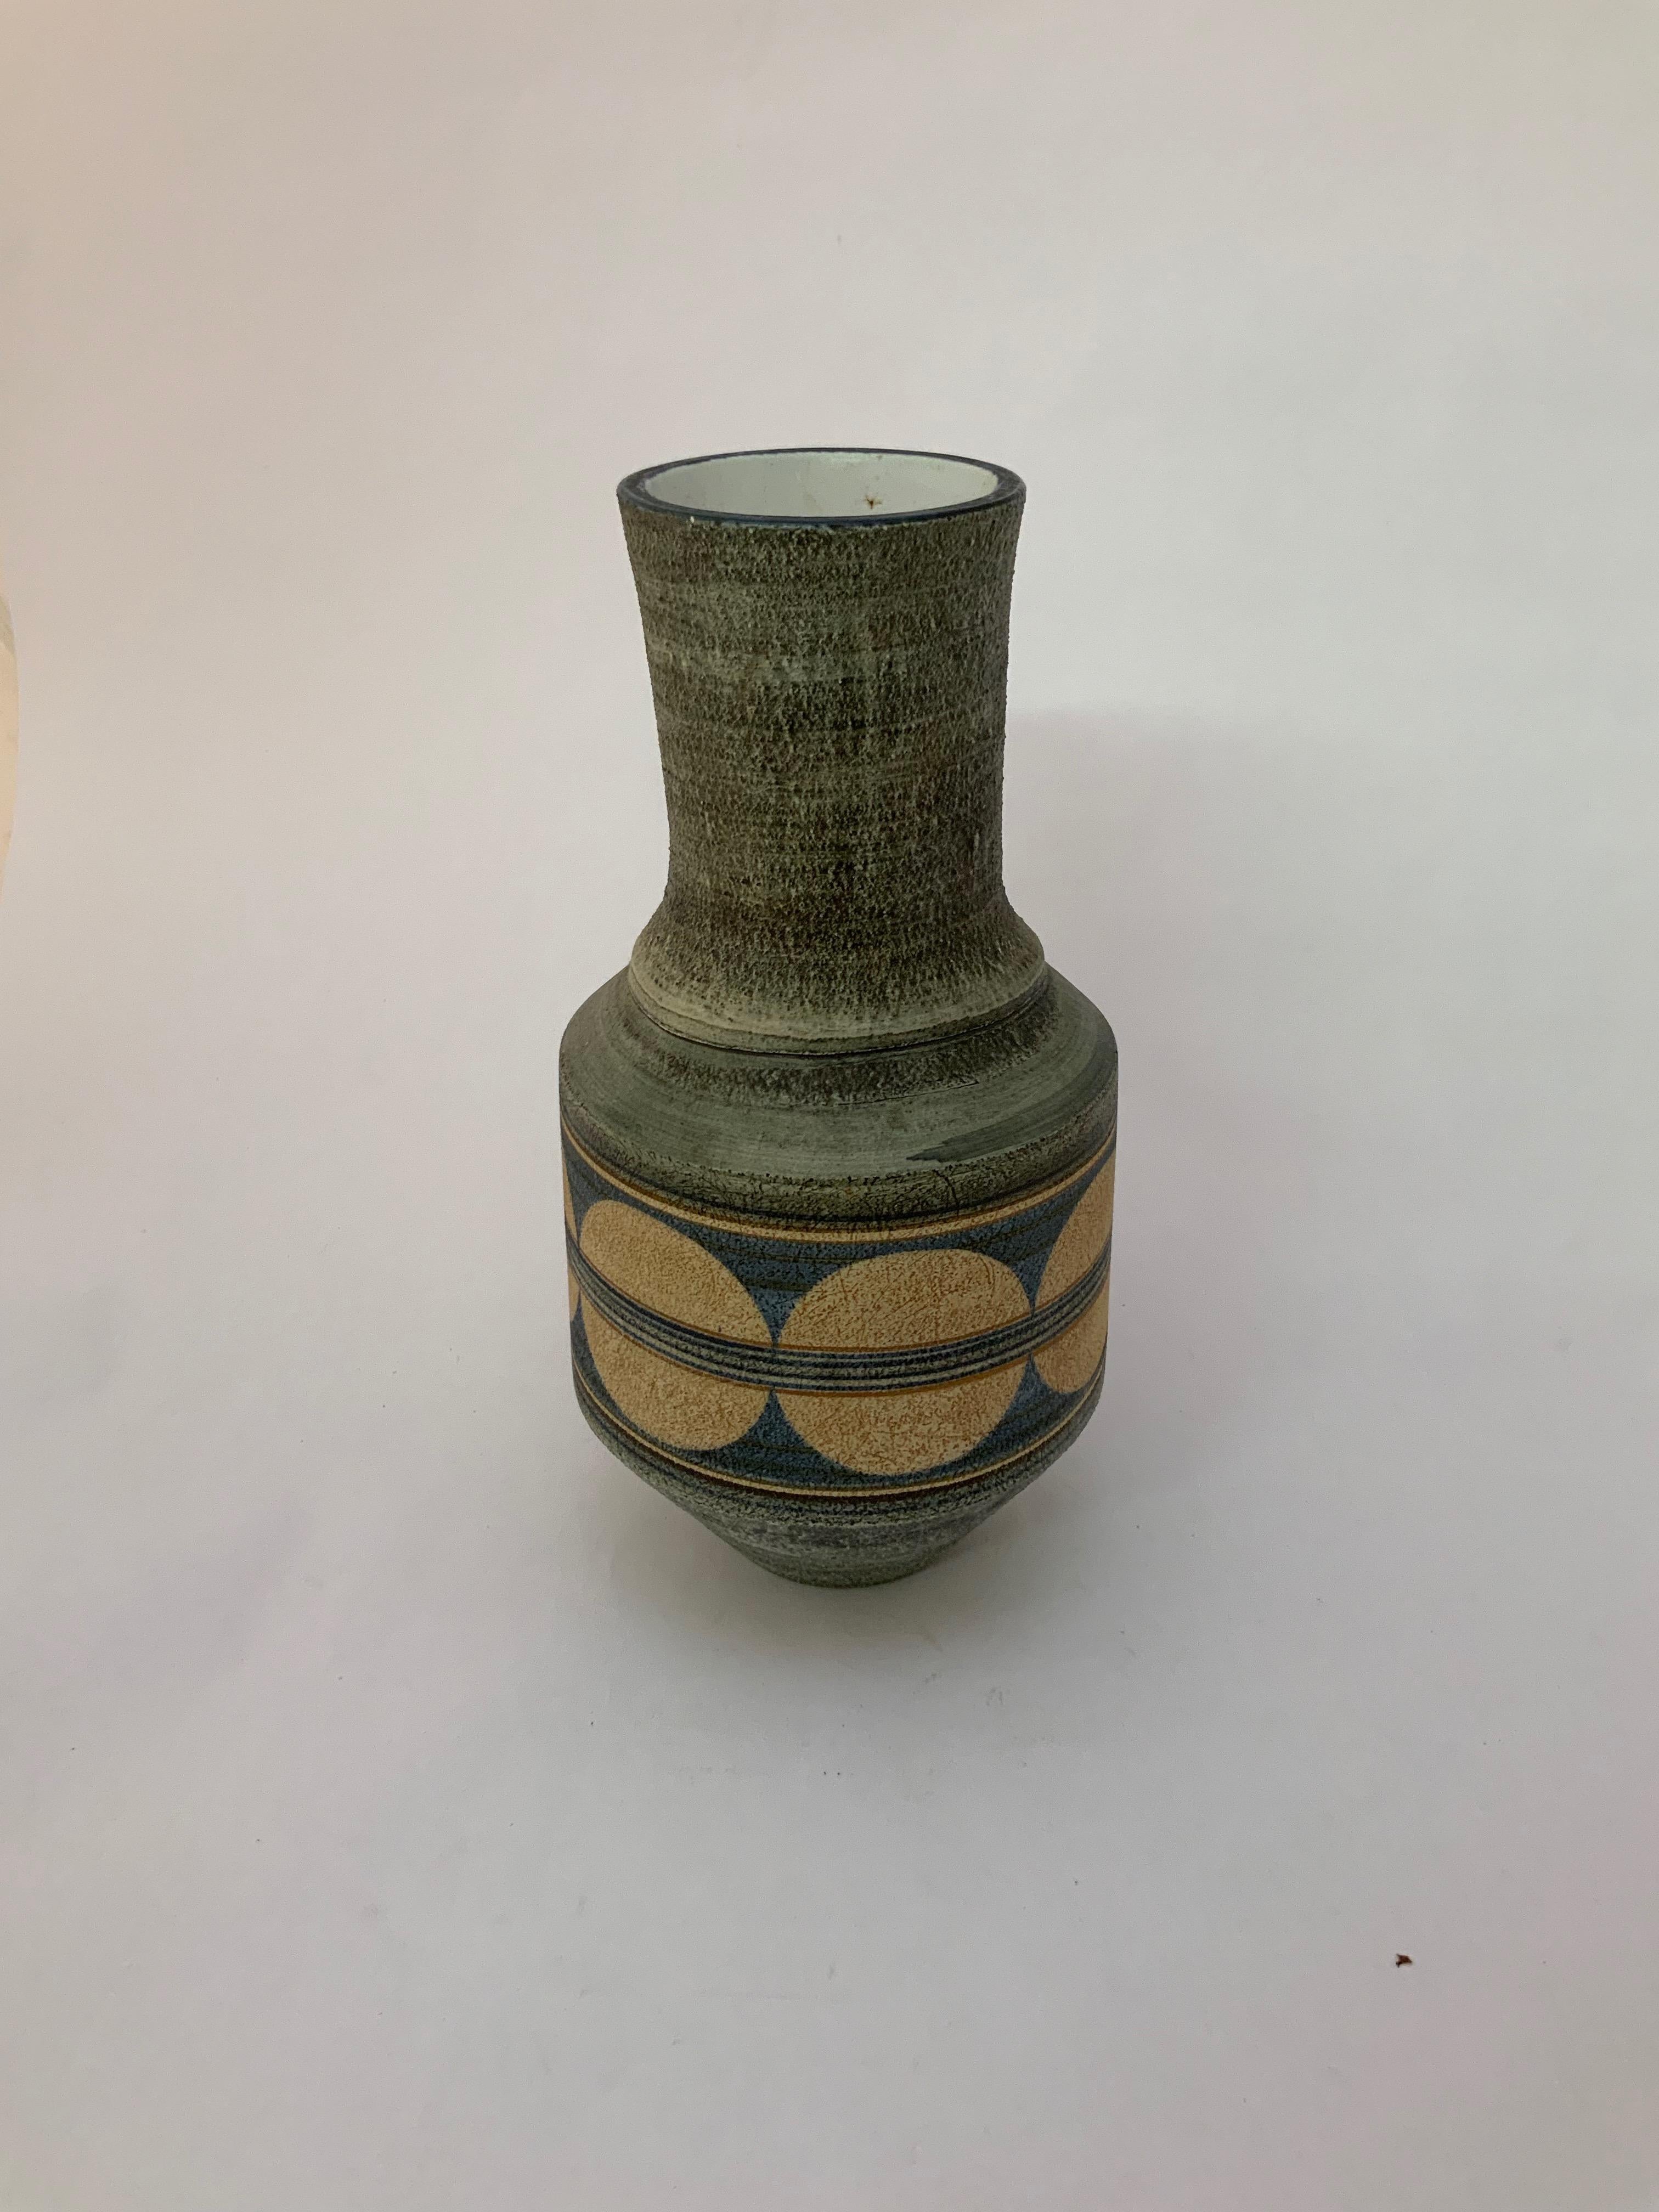 Mould cast vase by Troika, Cornwall, England. Fully signed, Troika, PB (Penny Broadribb). Broadribb worked for Troika in the 1970s. Very good condition with no visible chips, cracks, hairlines, crazing or restorations.

Measures: Approximately 5